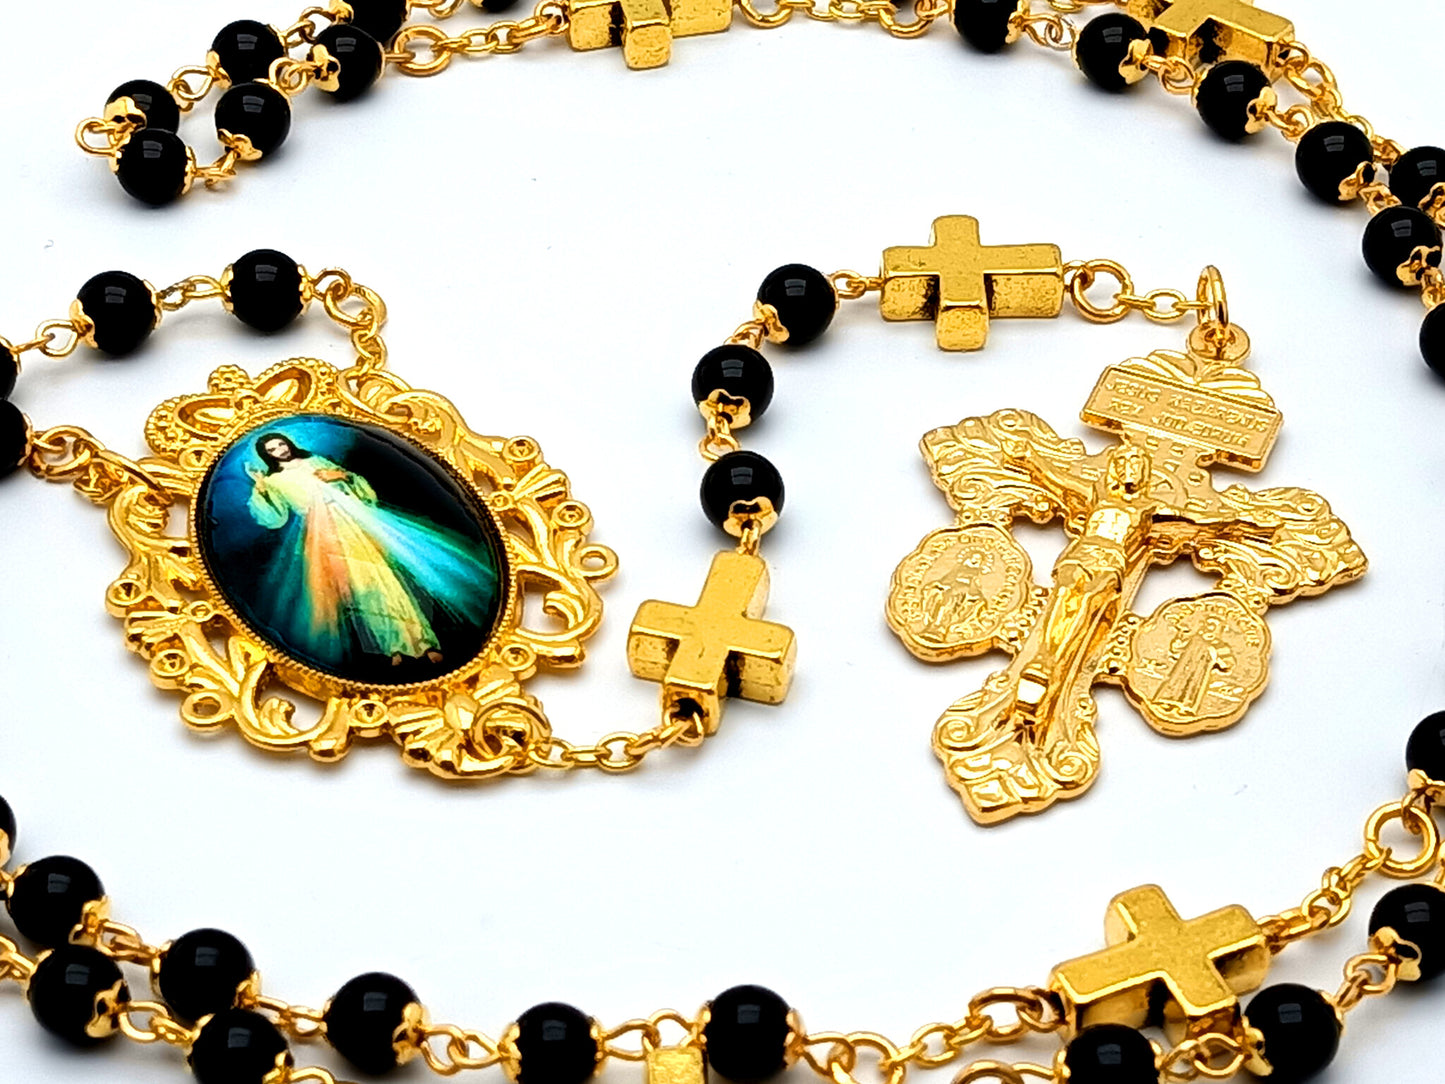 Divine Mercy unique rosary beads with onyx gemstone and gold plated beads and Miraculous medal pardon crucifix.